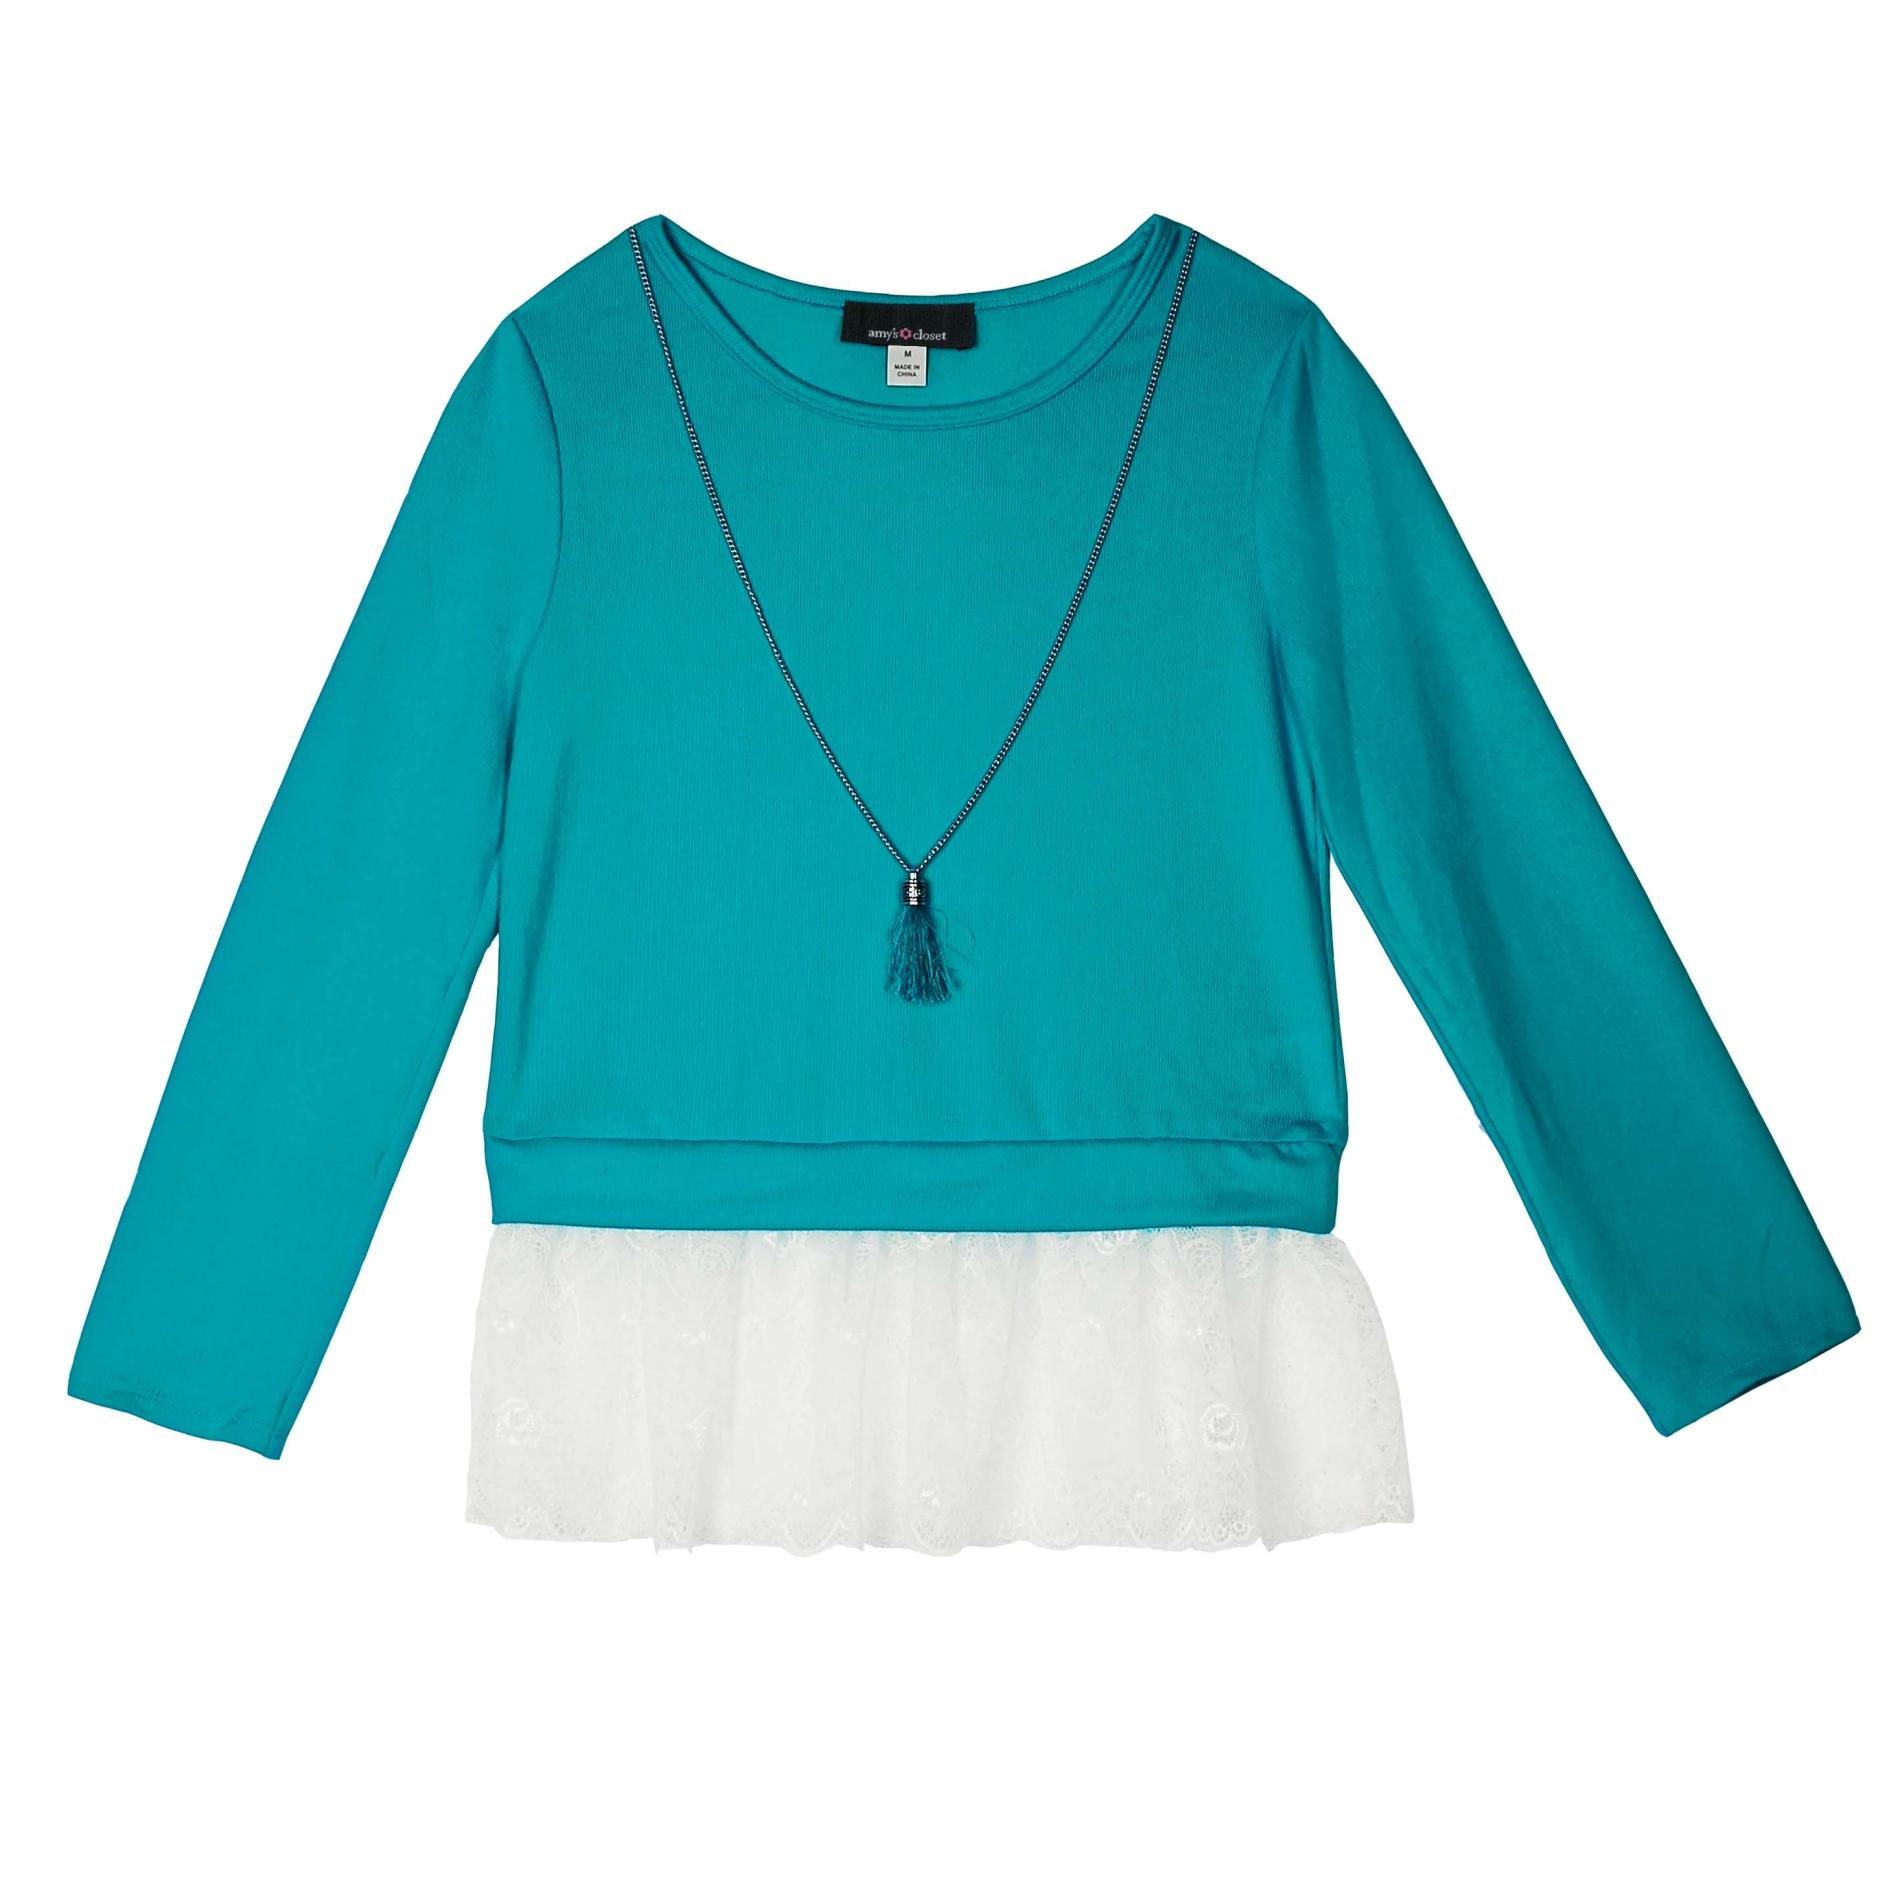 Amy's Closet Girl's Layered-Look Necklace Top